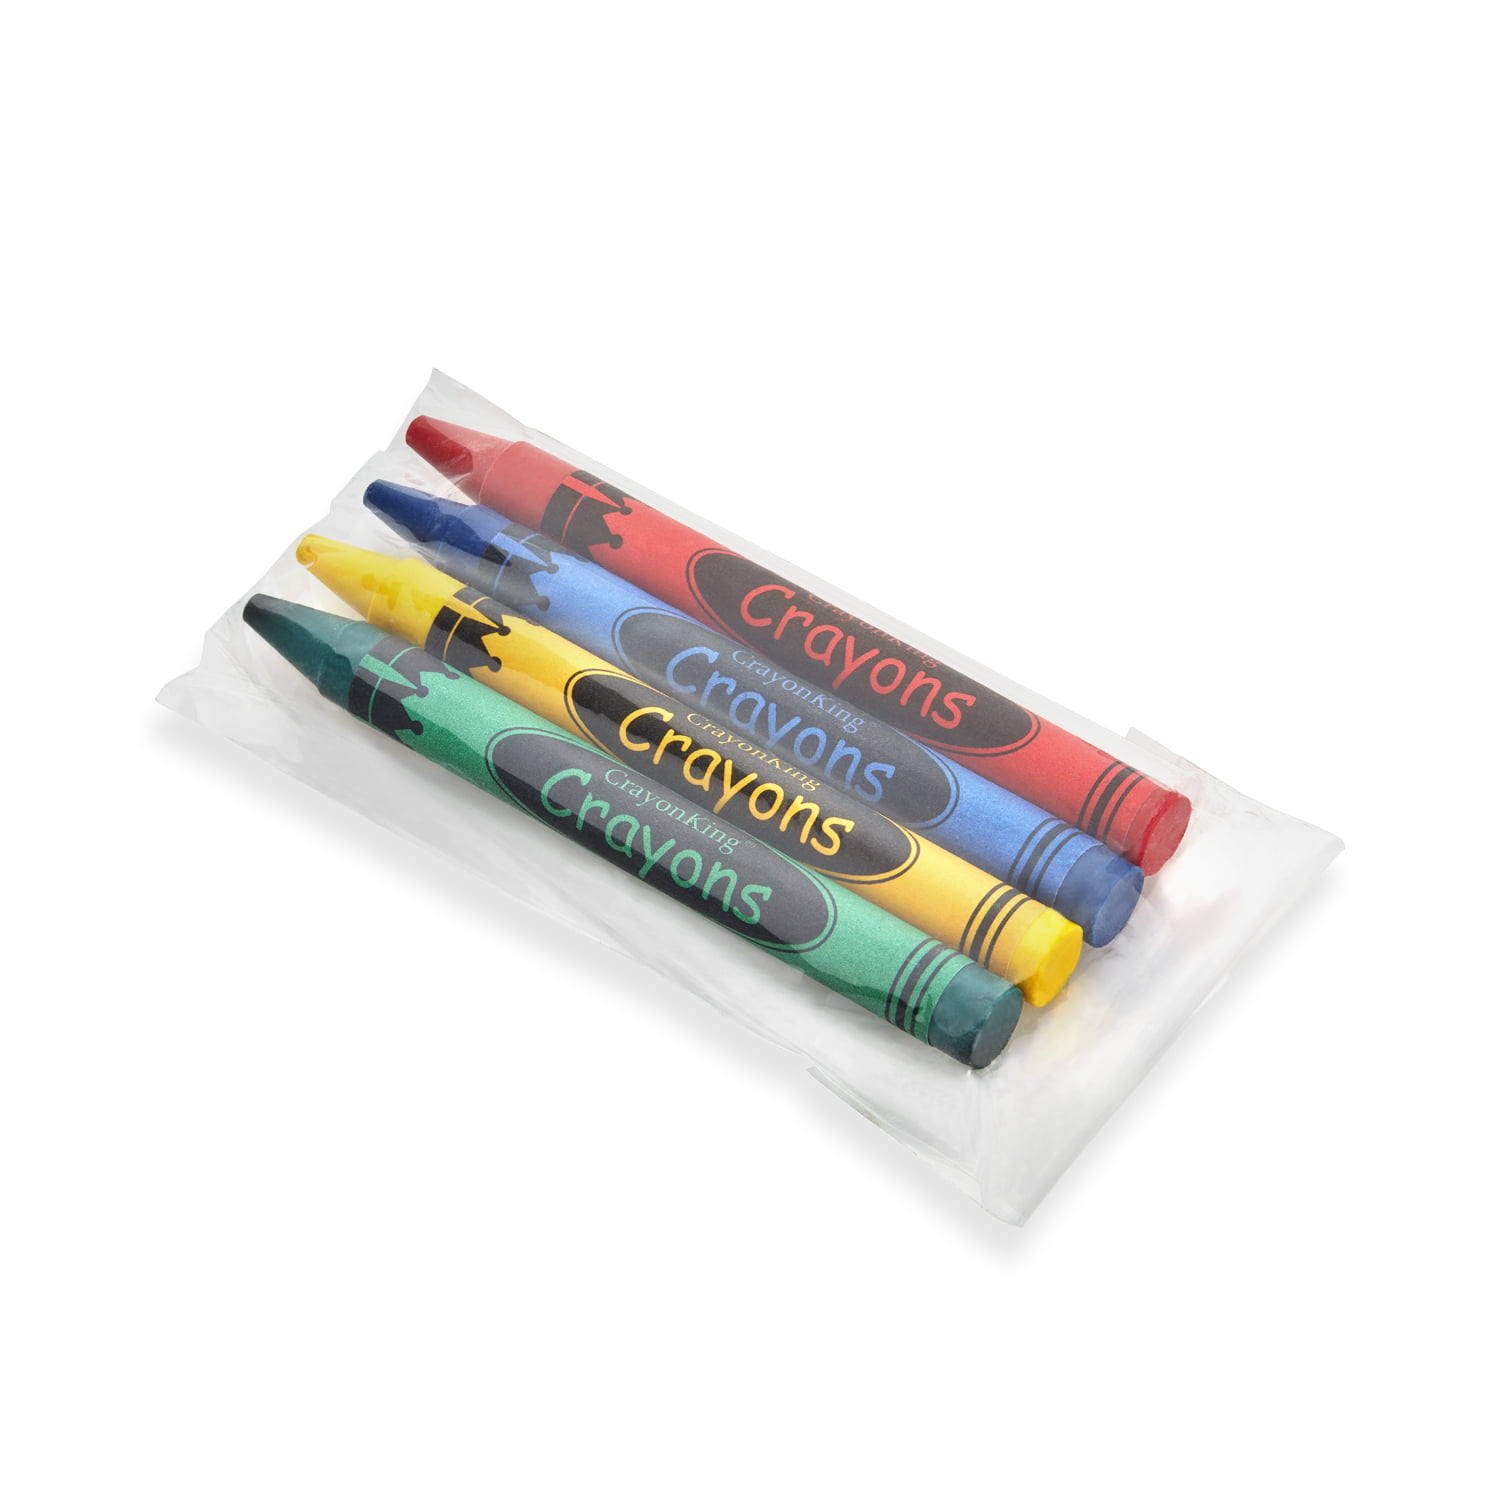 Download CrayonKing 2,000 Bulk Crayons (500 Sets of 4-Pack in Cello) Restaurants, Party Favors, Birthdays ...